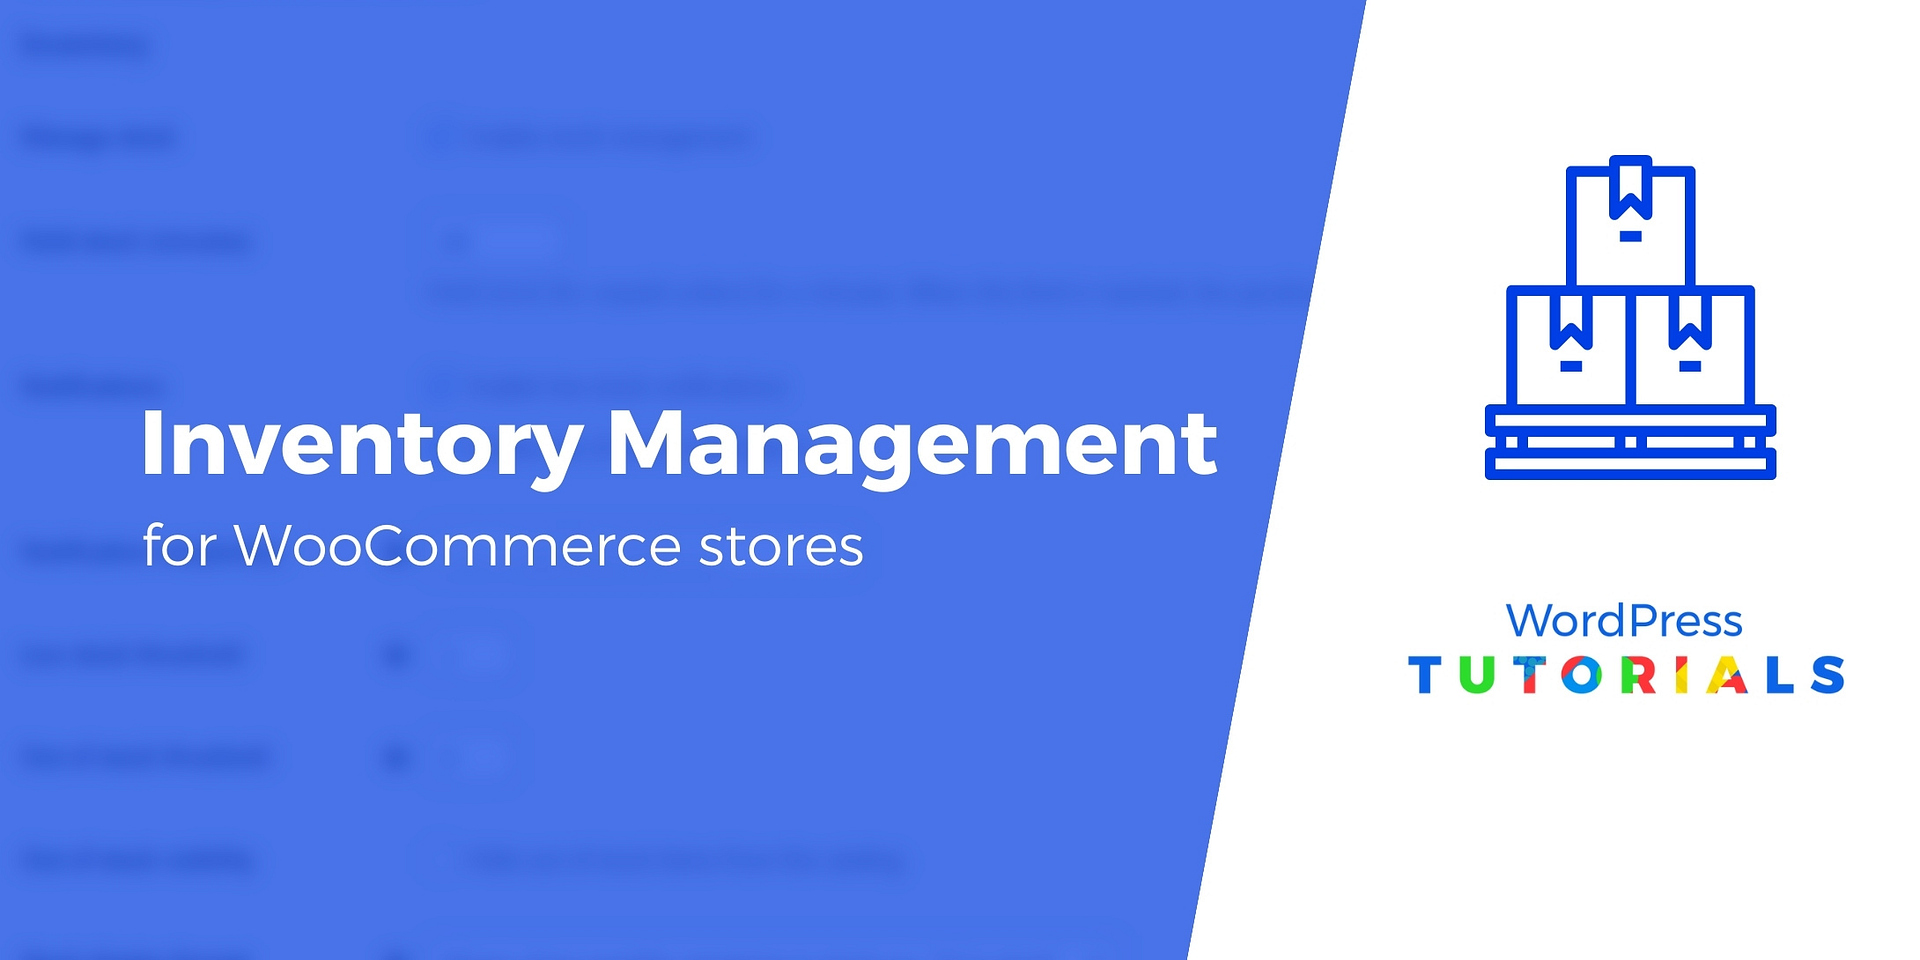 inventory management for small business woocommerce